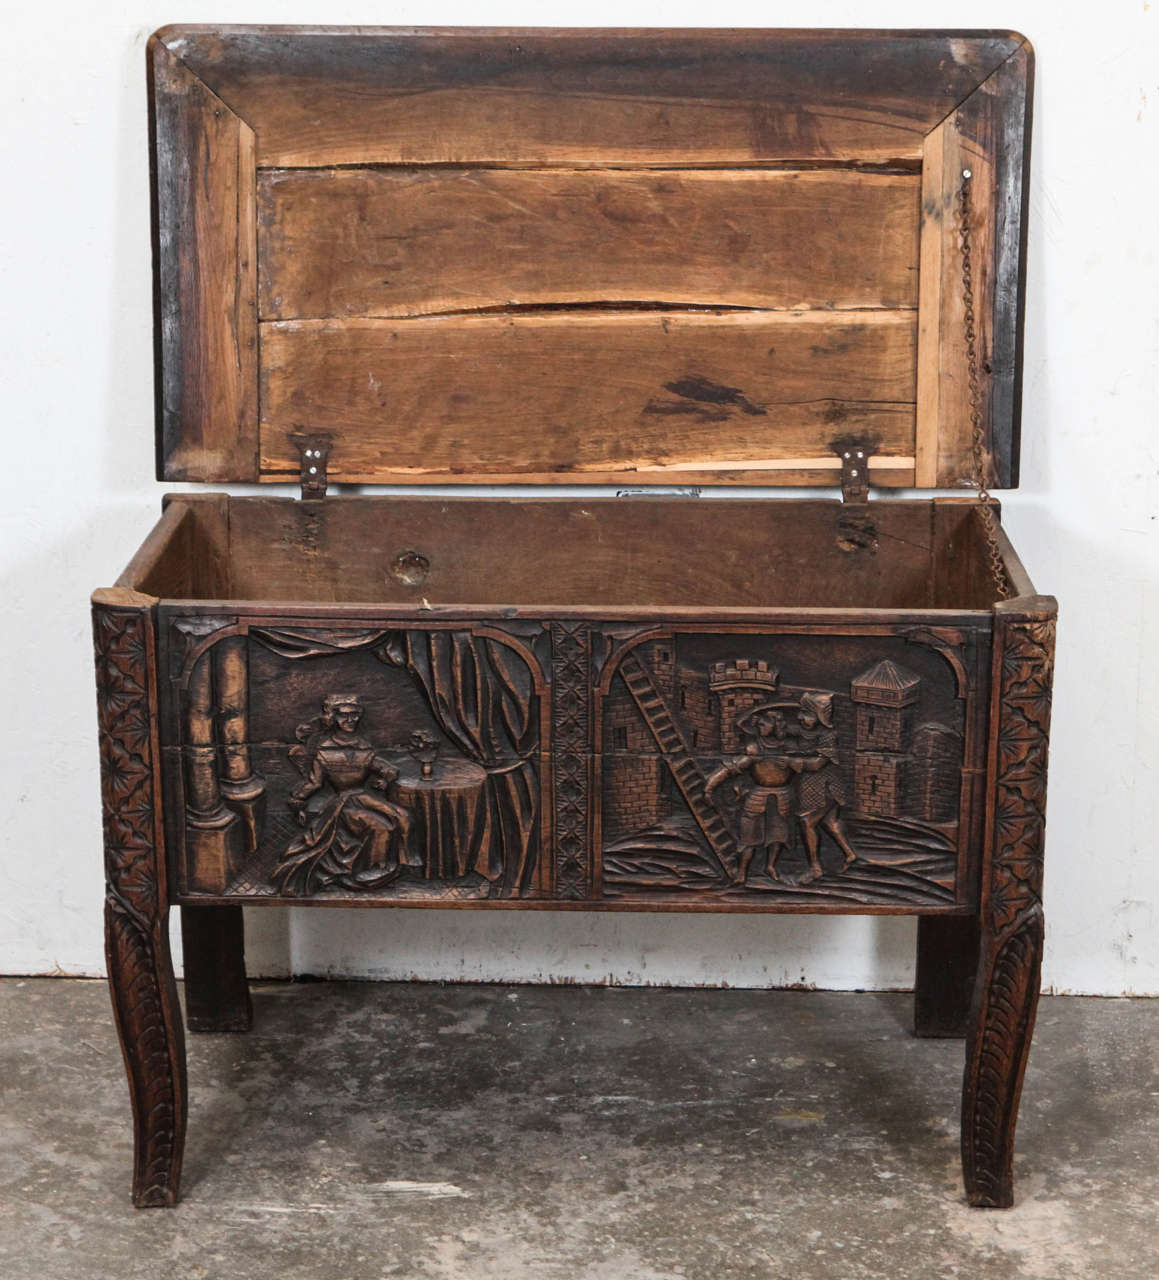 19th Century Vintage Carved Gothic Style Chest / Trunk